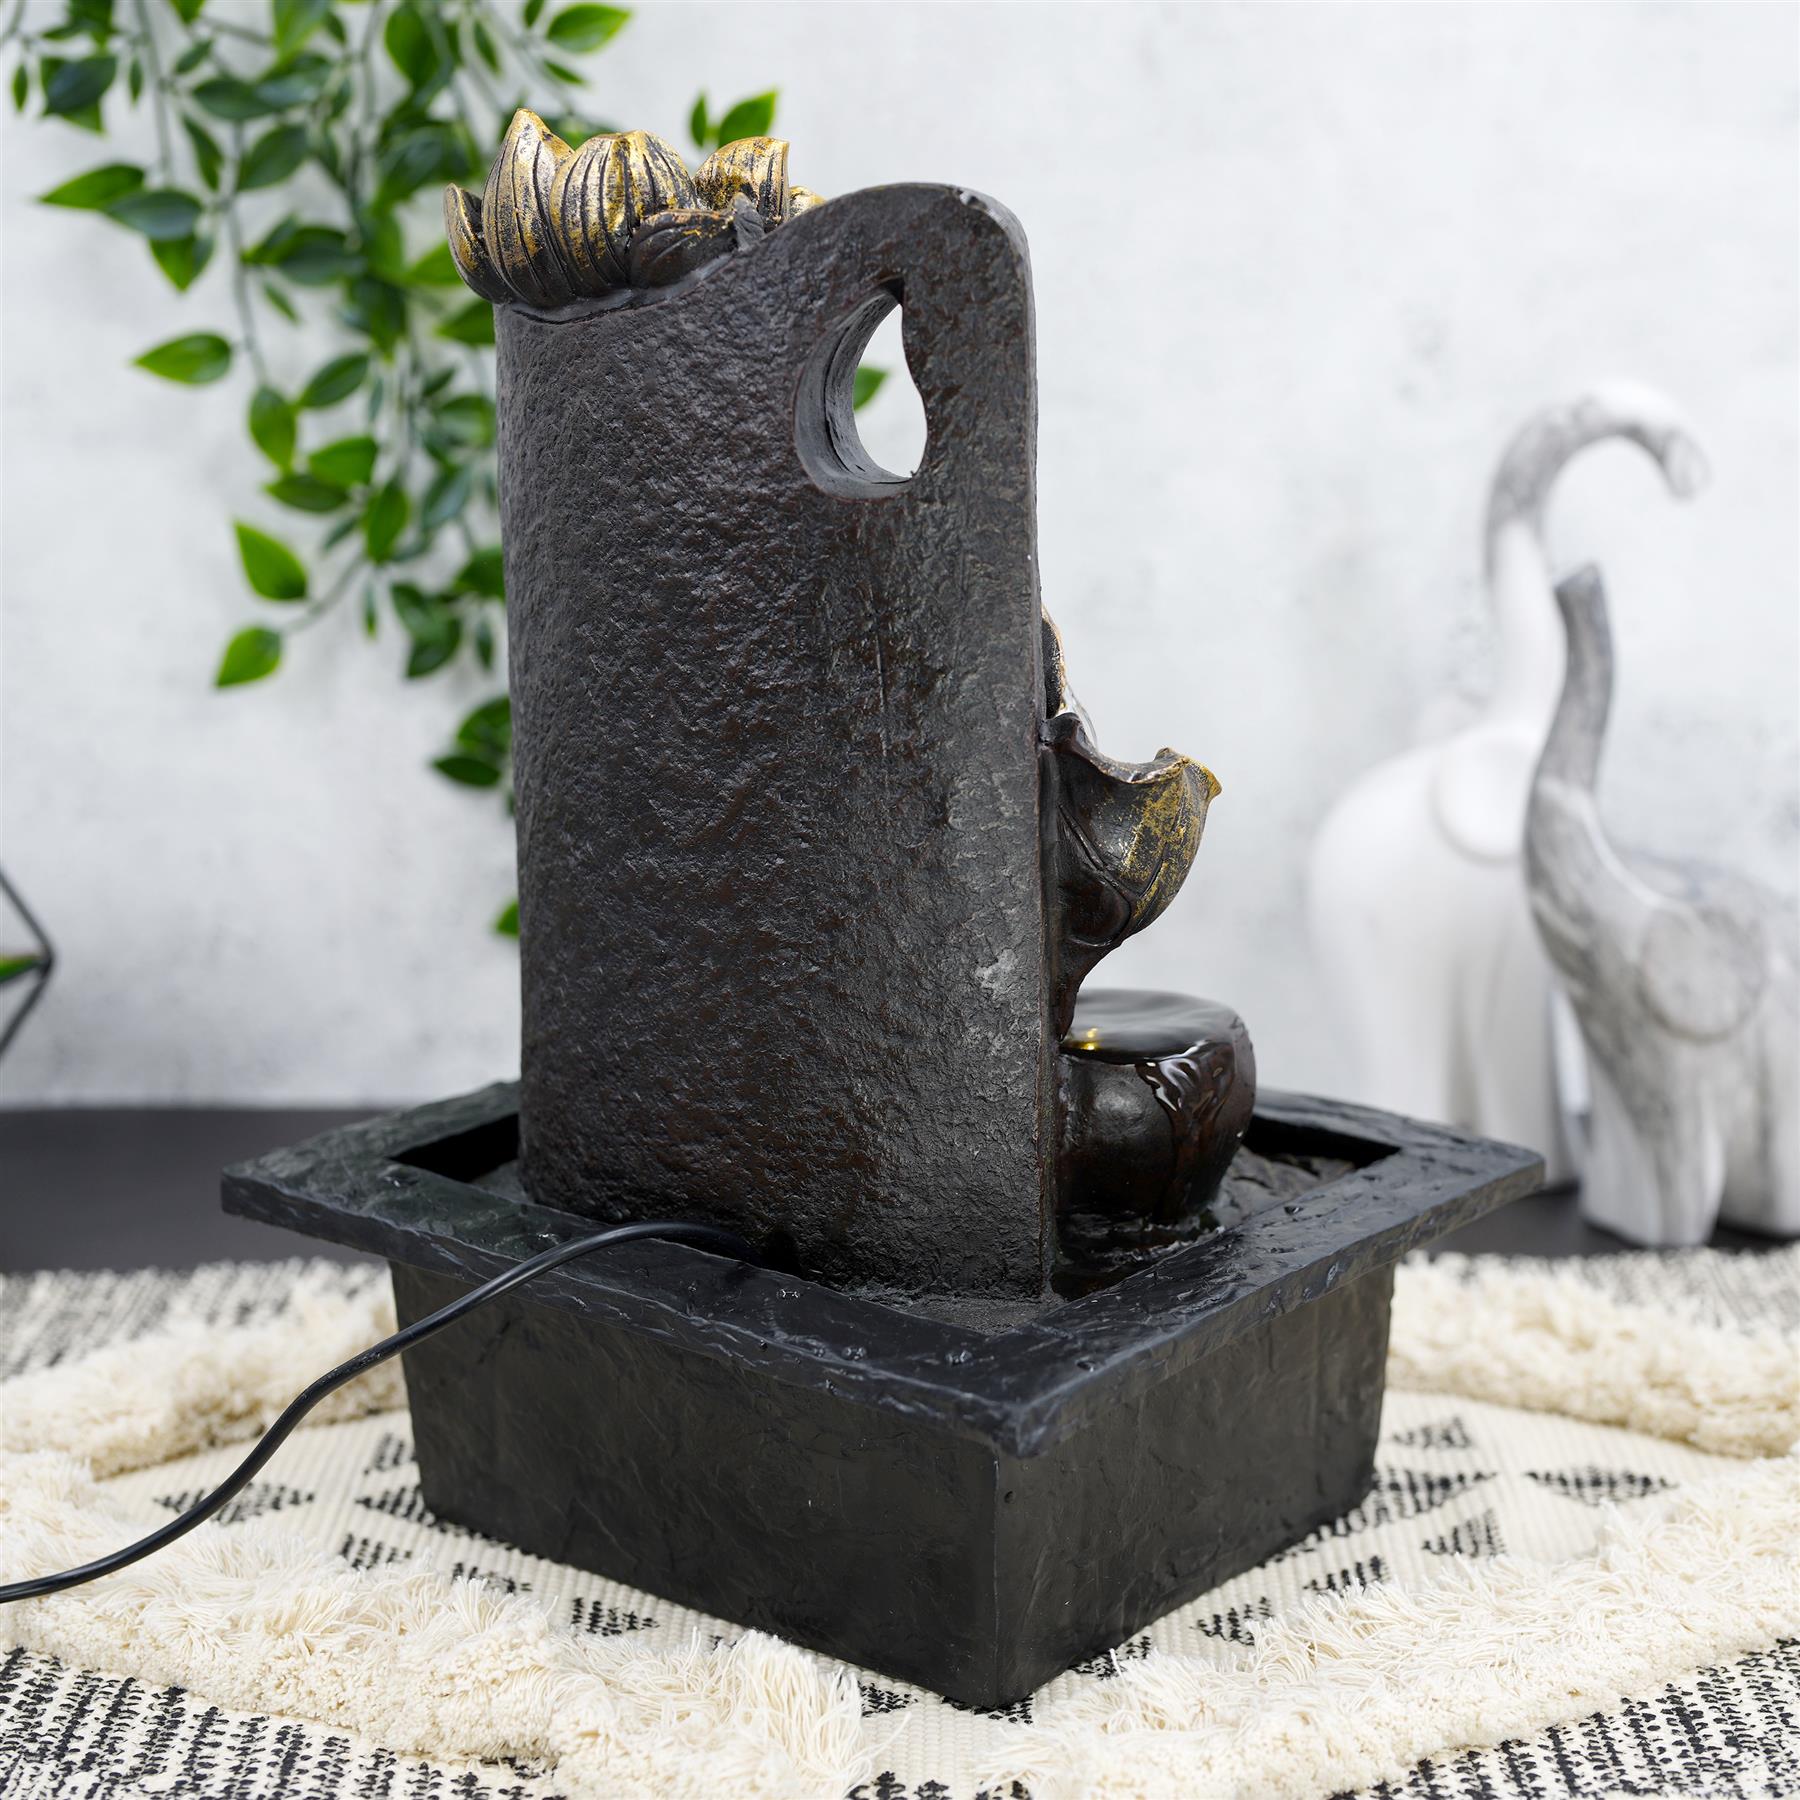 Buddha  Water Feature Led Lights by GEEZY - UKBuyZone